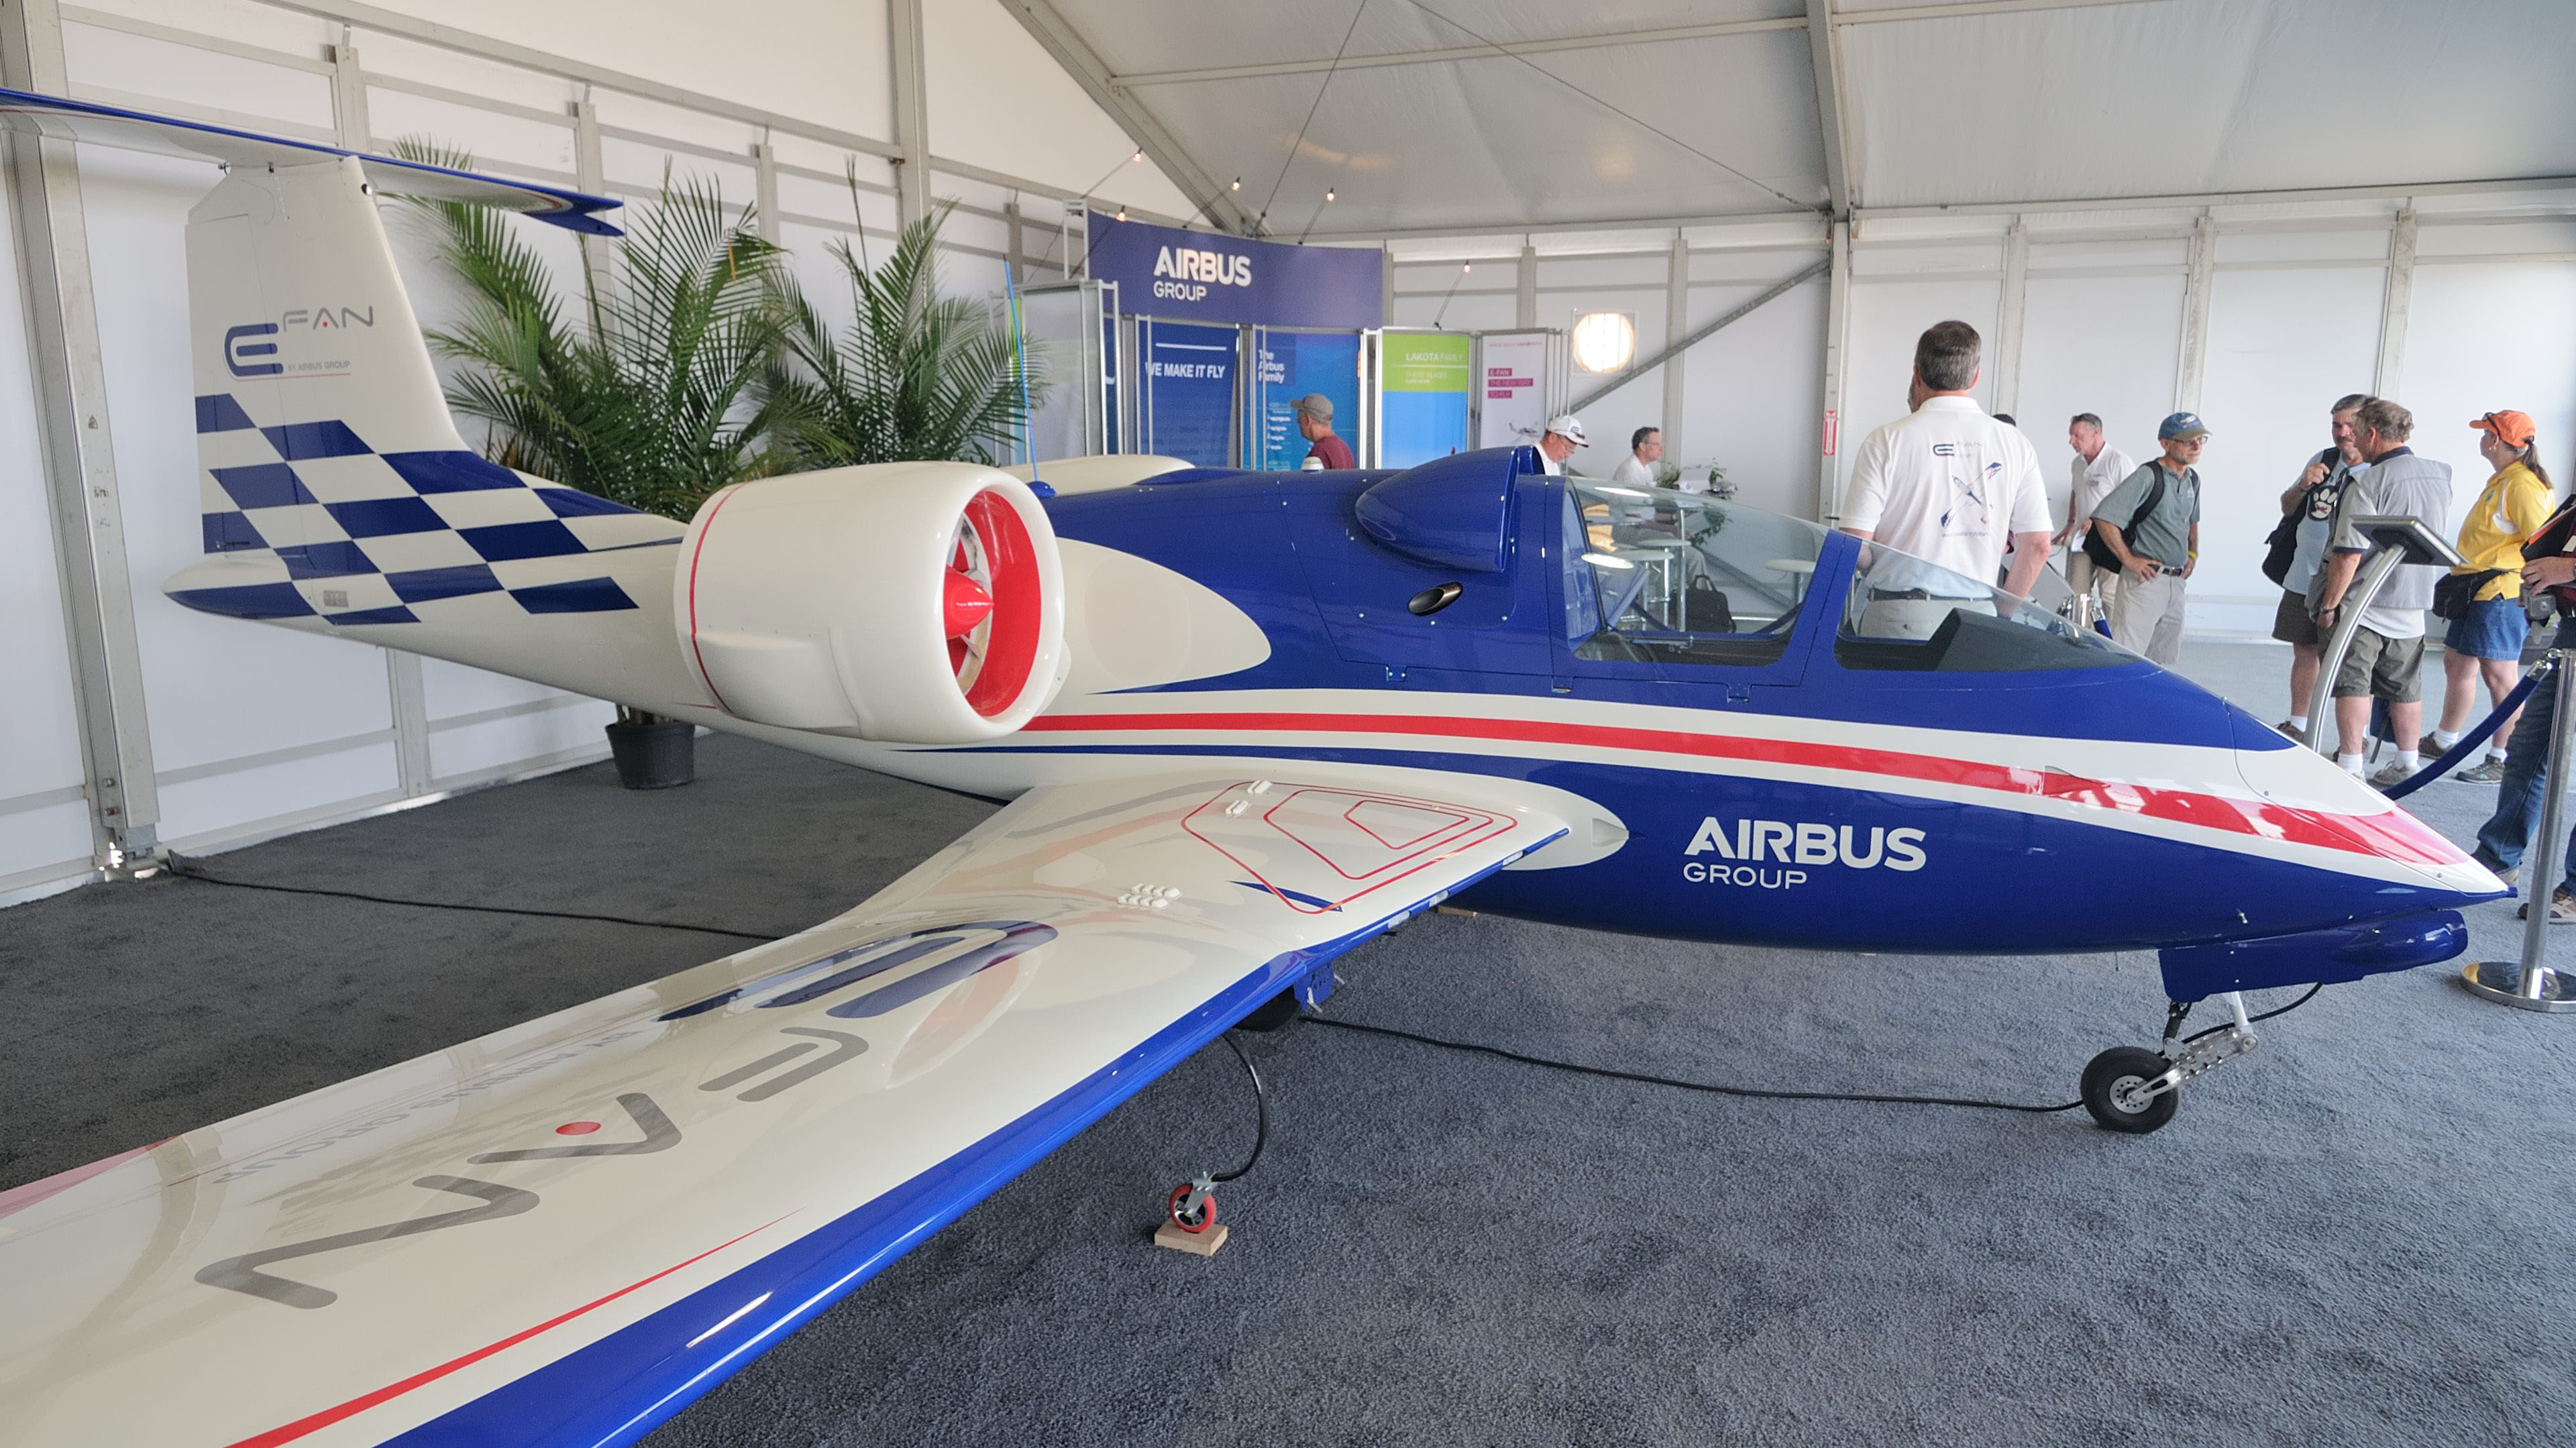 Airbus exhibited its E-Fan electric airplane at EAA AirVenture 2016. Photo by Mike Collins.